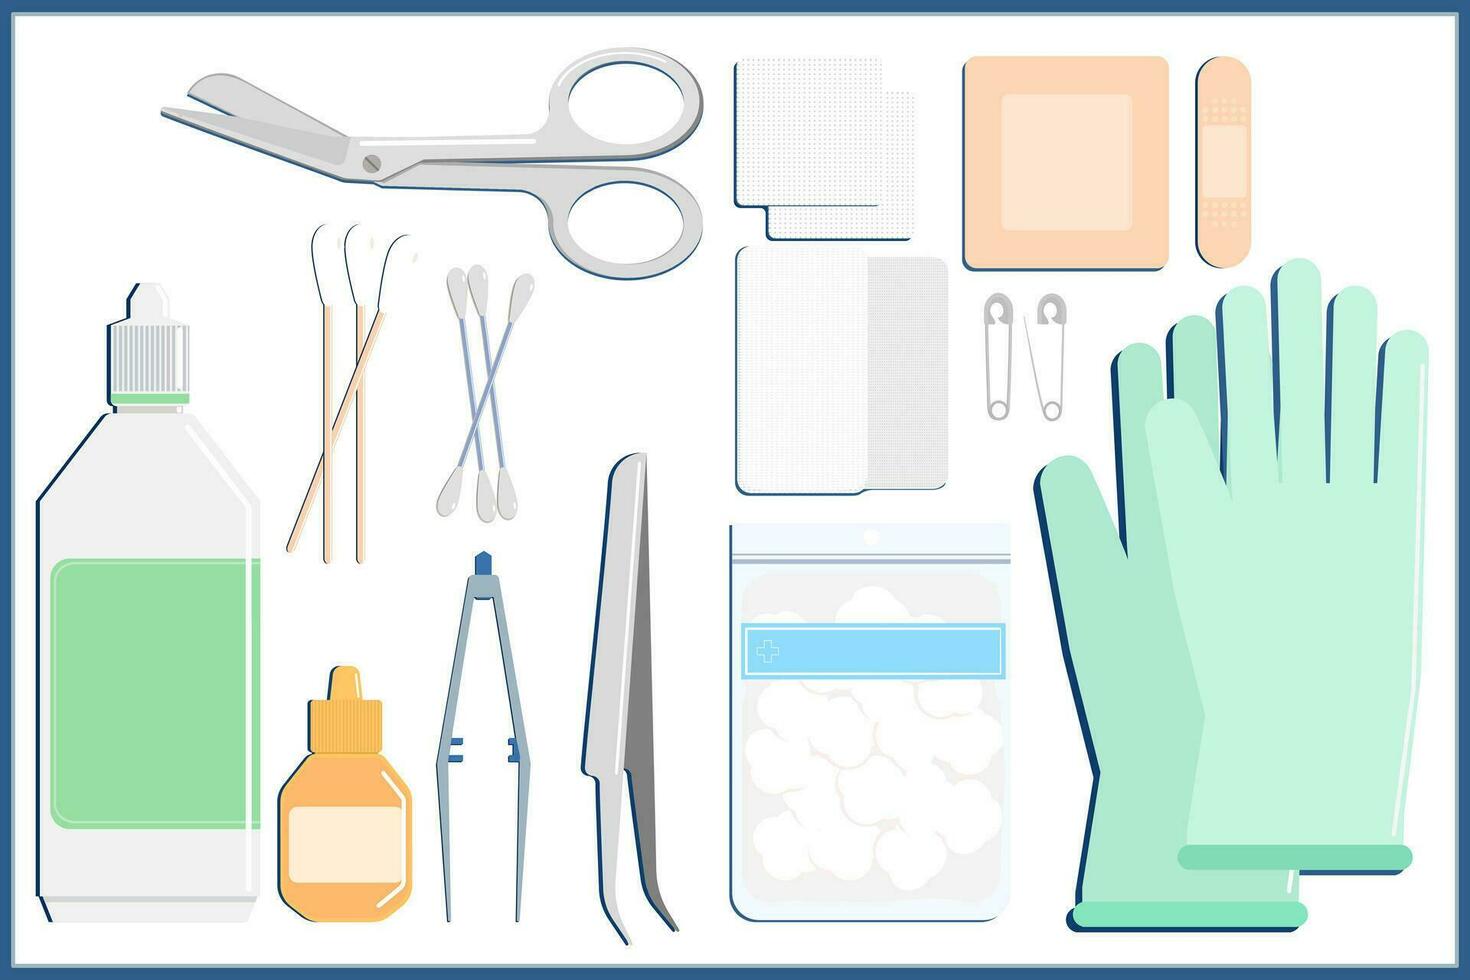 concept vector illustration Set of first aid kit in case of wounds, gauze, lister bandage scissor, forceps, surgical glove.adhesive bandage,saline solution .flat style